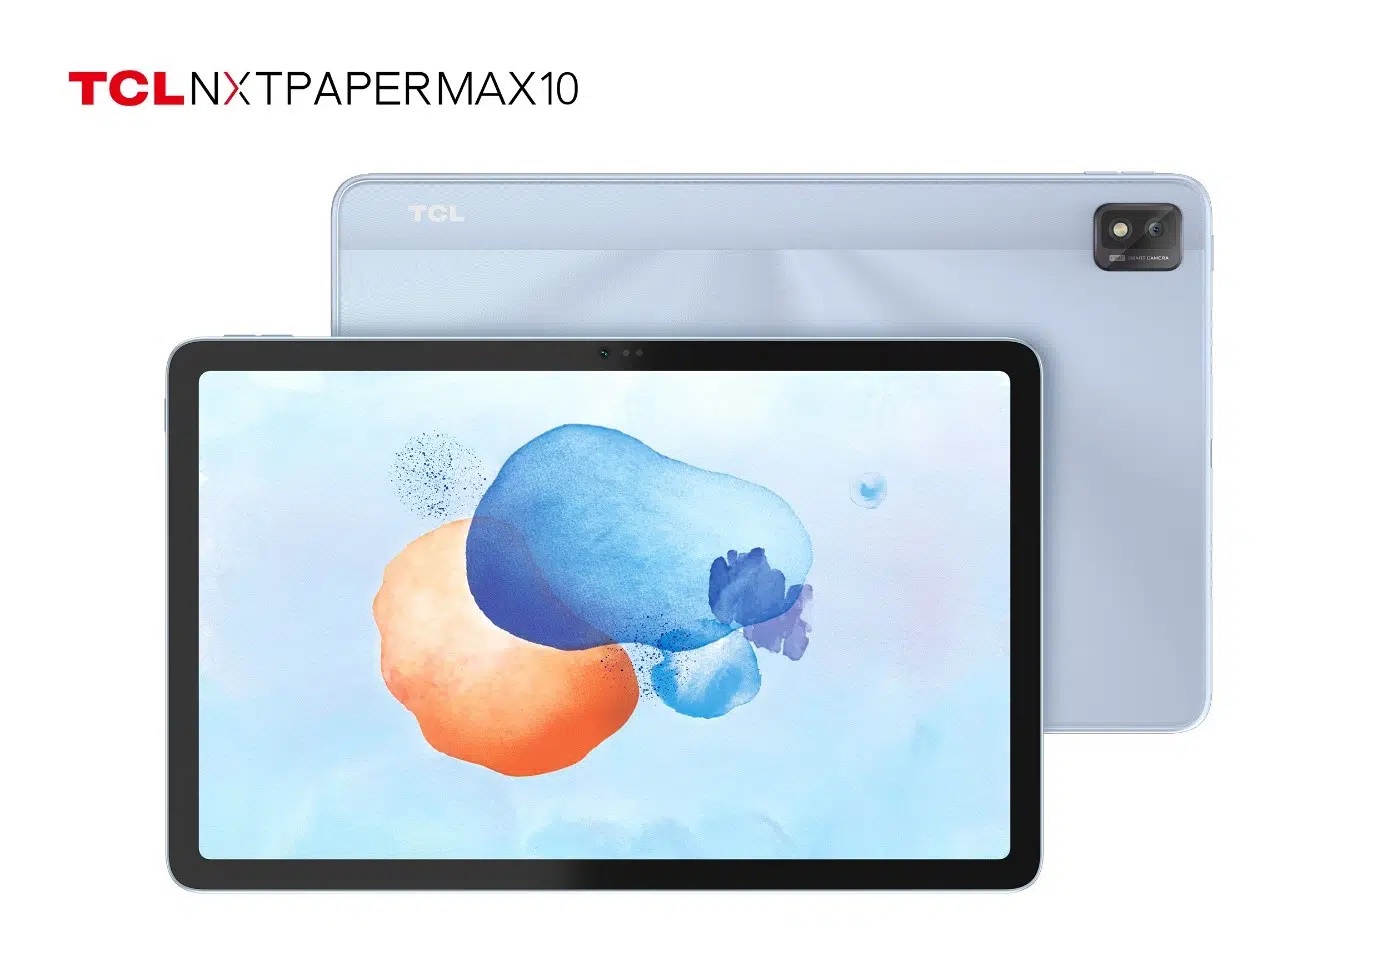 TCL NXTPAPER MAX 10 tablet